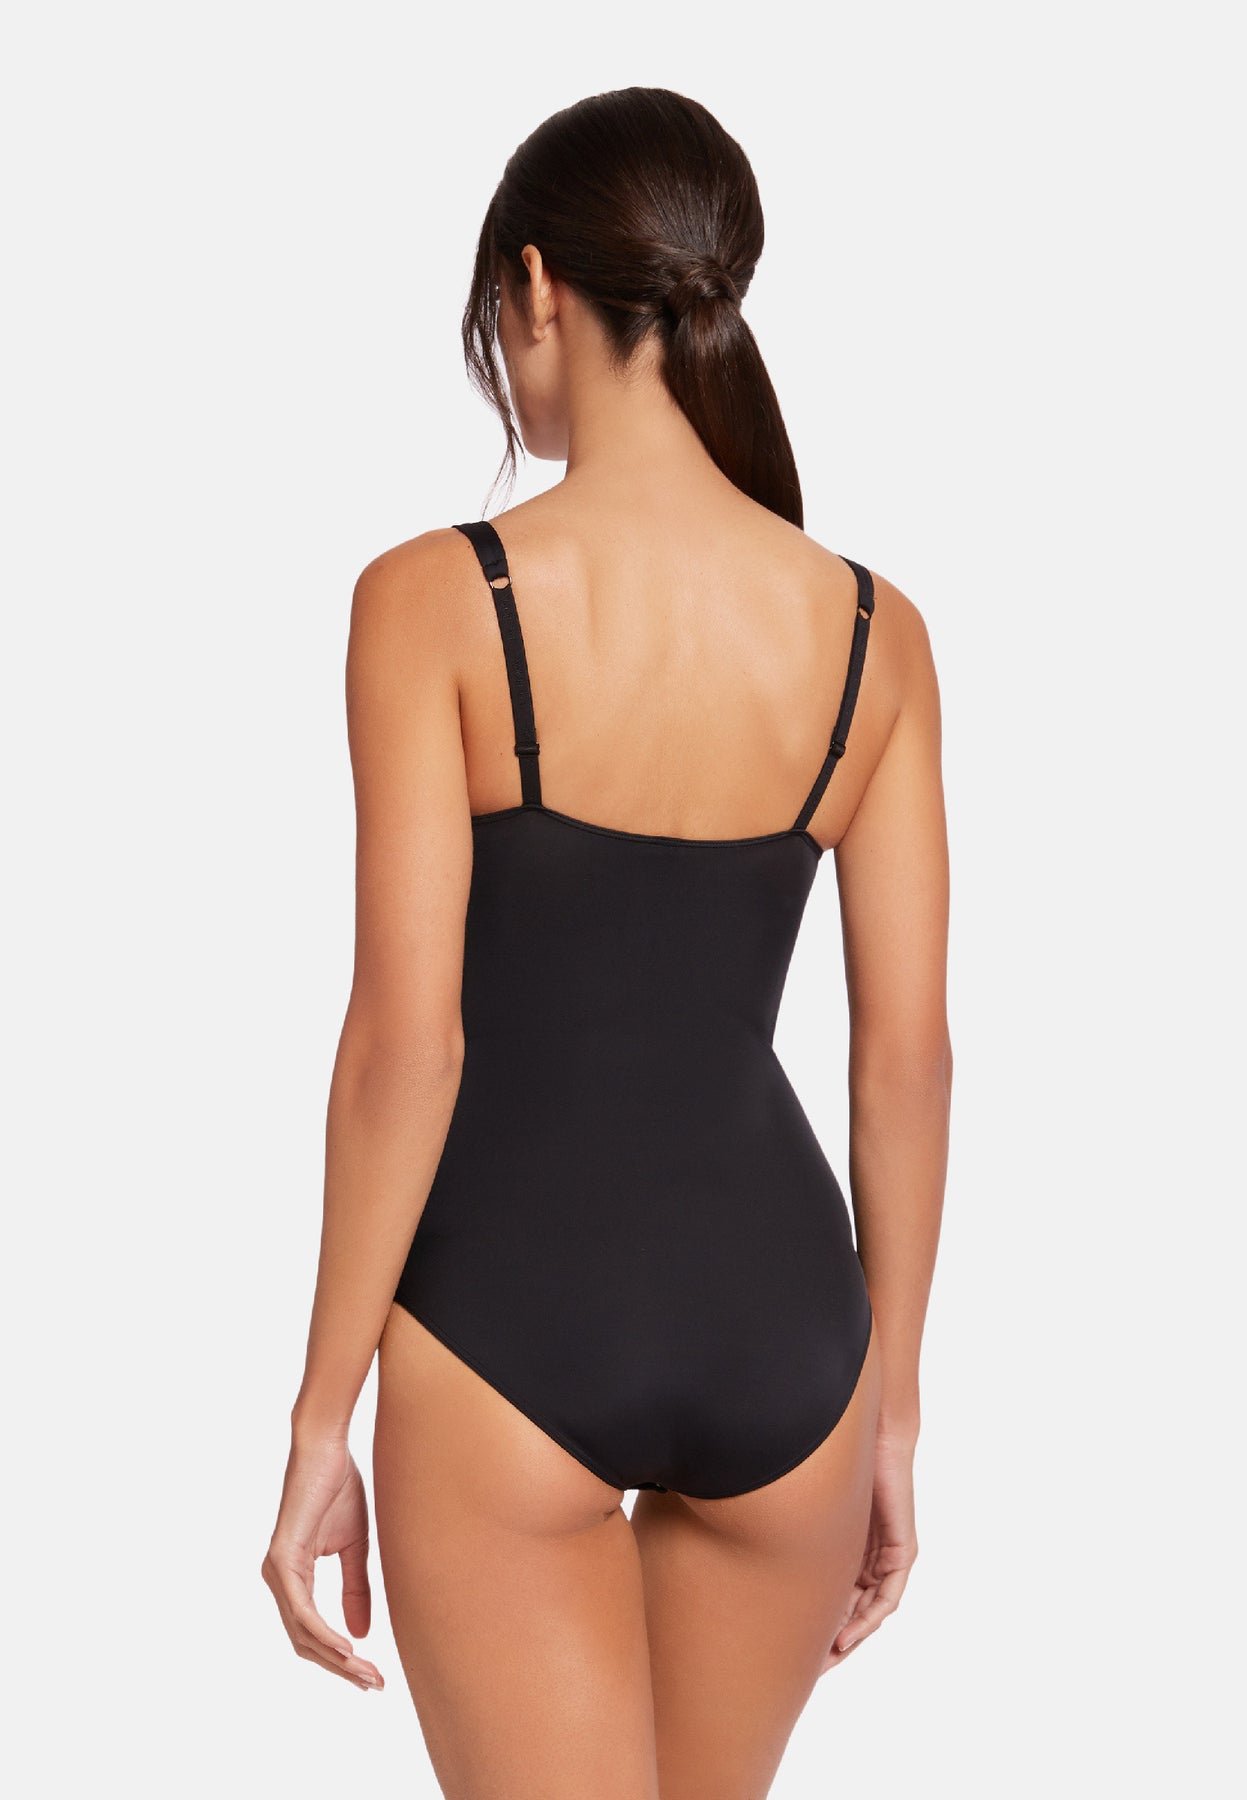 Mat de Luxe Forming Body – Wolford Sydney